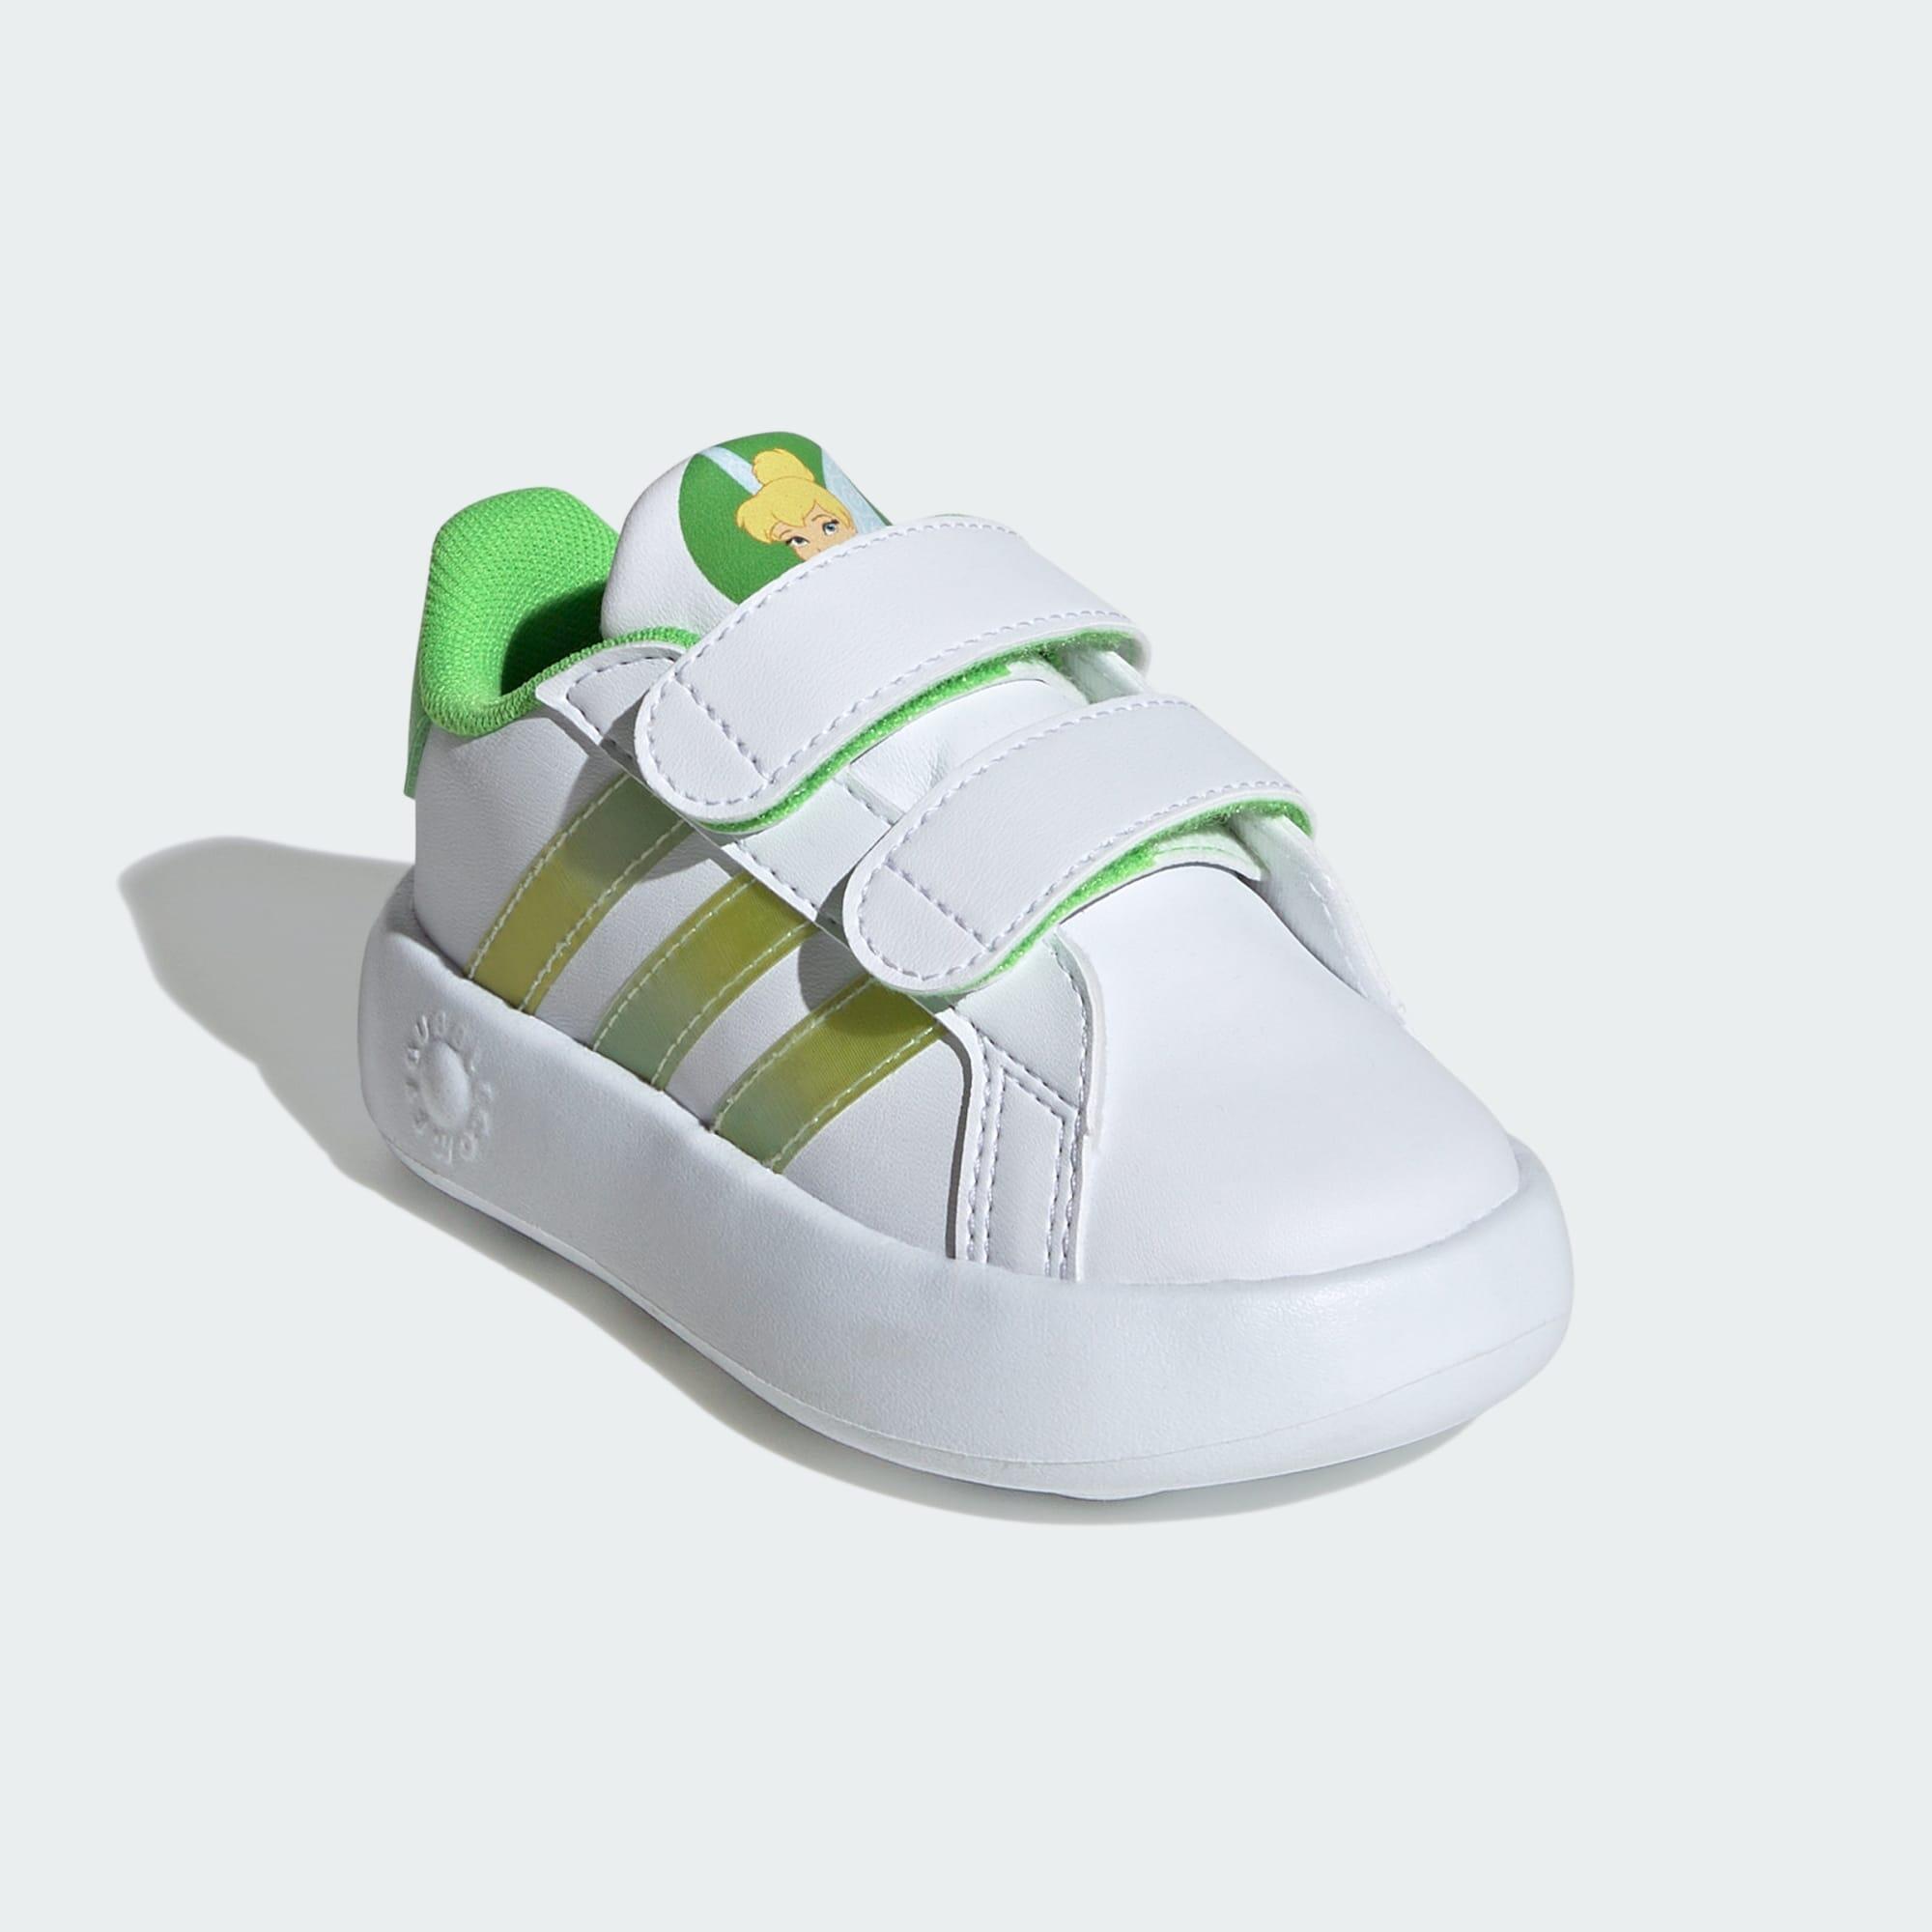 Grand Court 2.0 Tink Tennis Sportswear Shoes 5/7